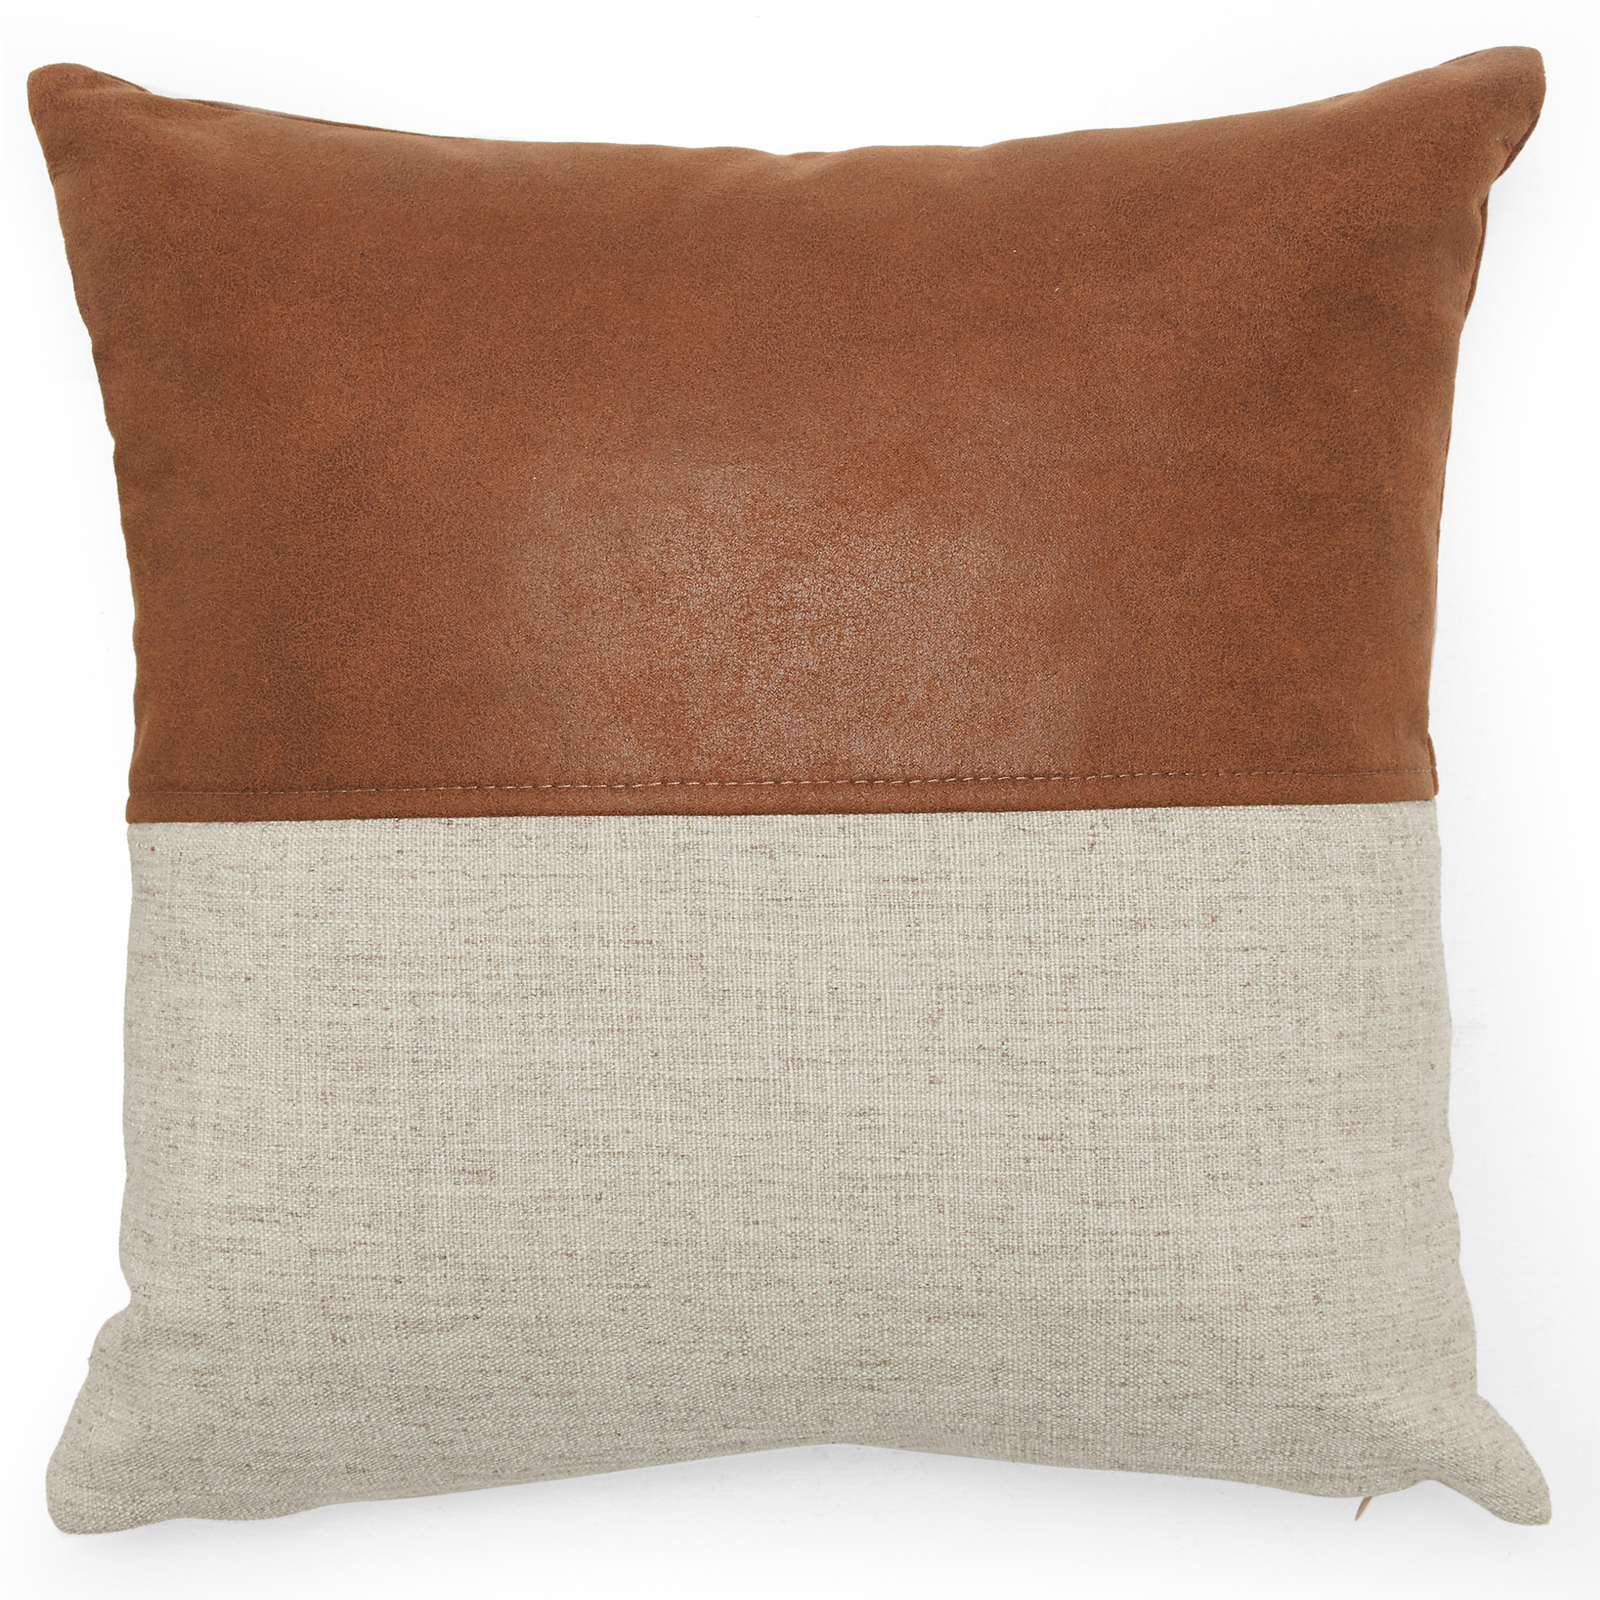 MoDRN Industrial Mixed Material Decorative Square Throw Pillow, 16" x 16", Faux Leather - image 1 of 9